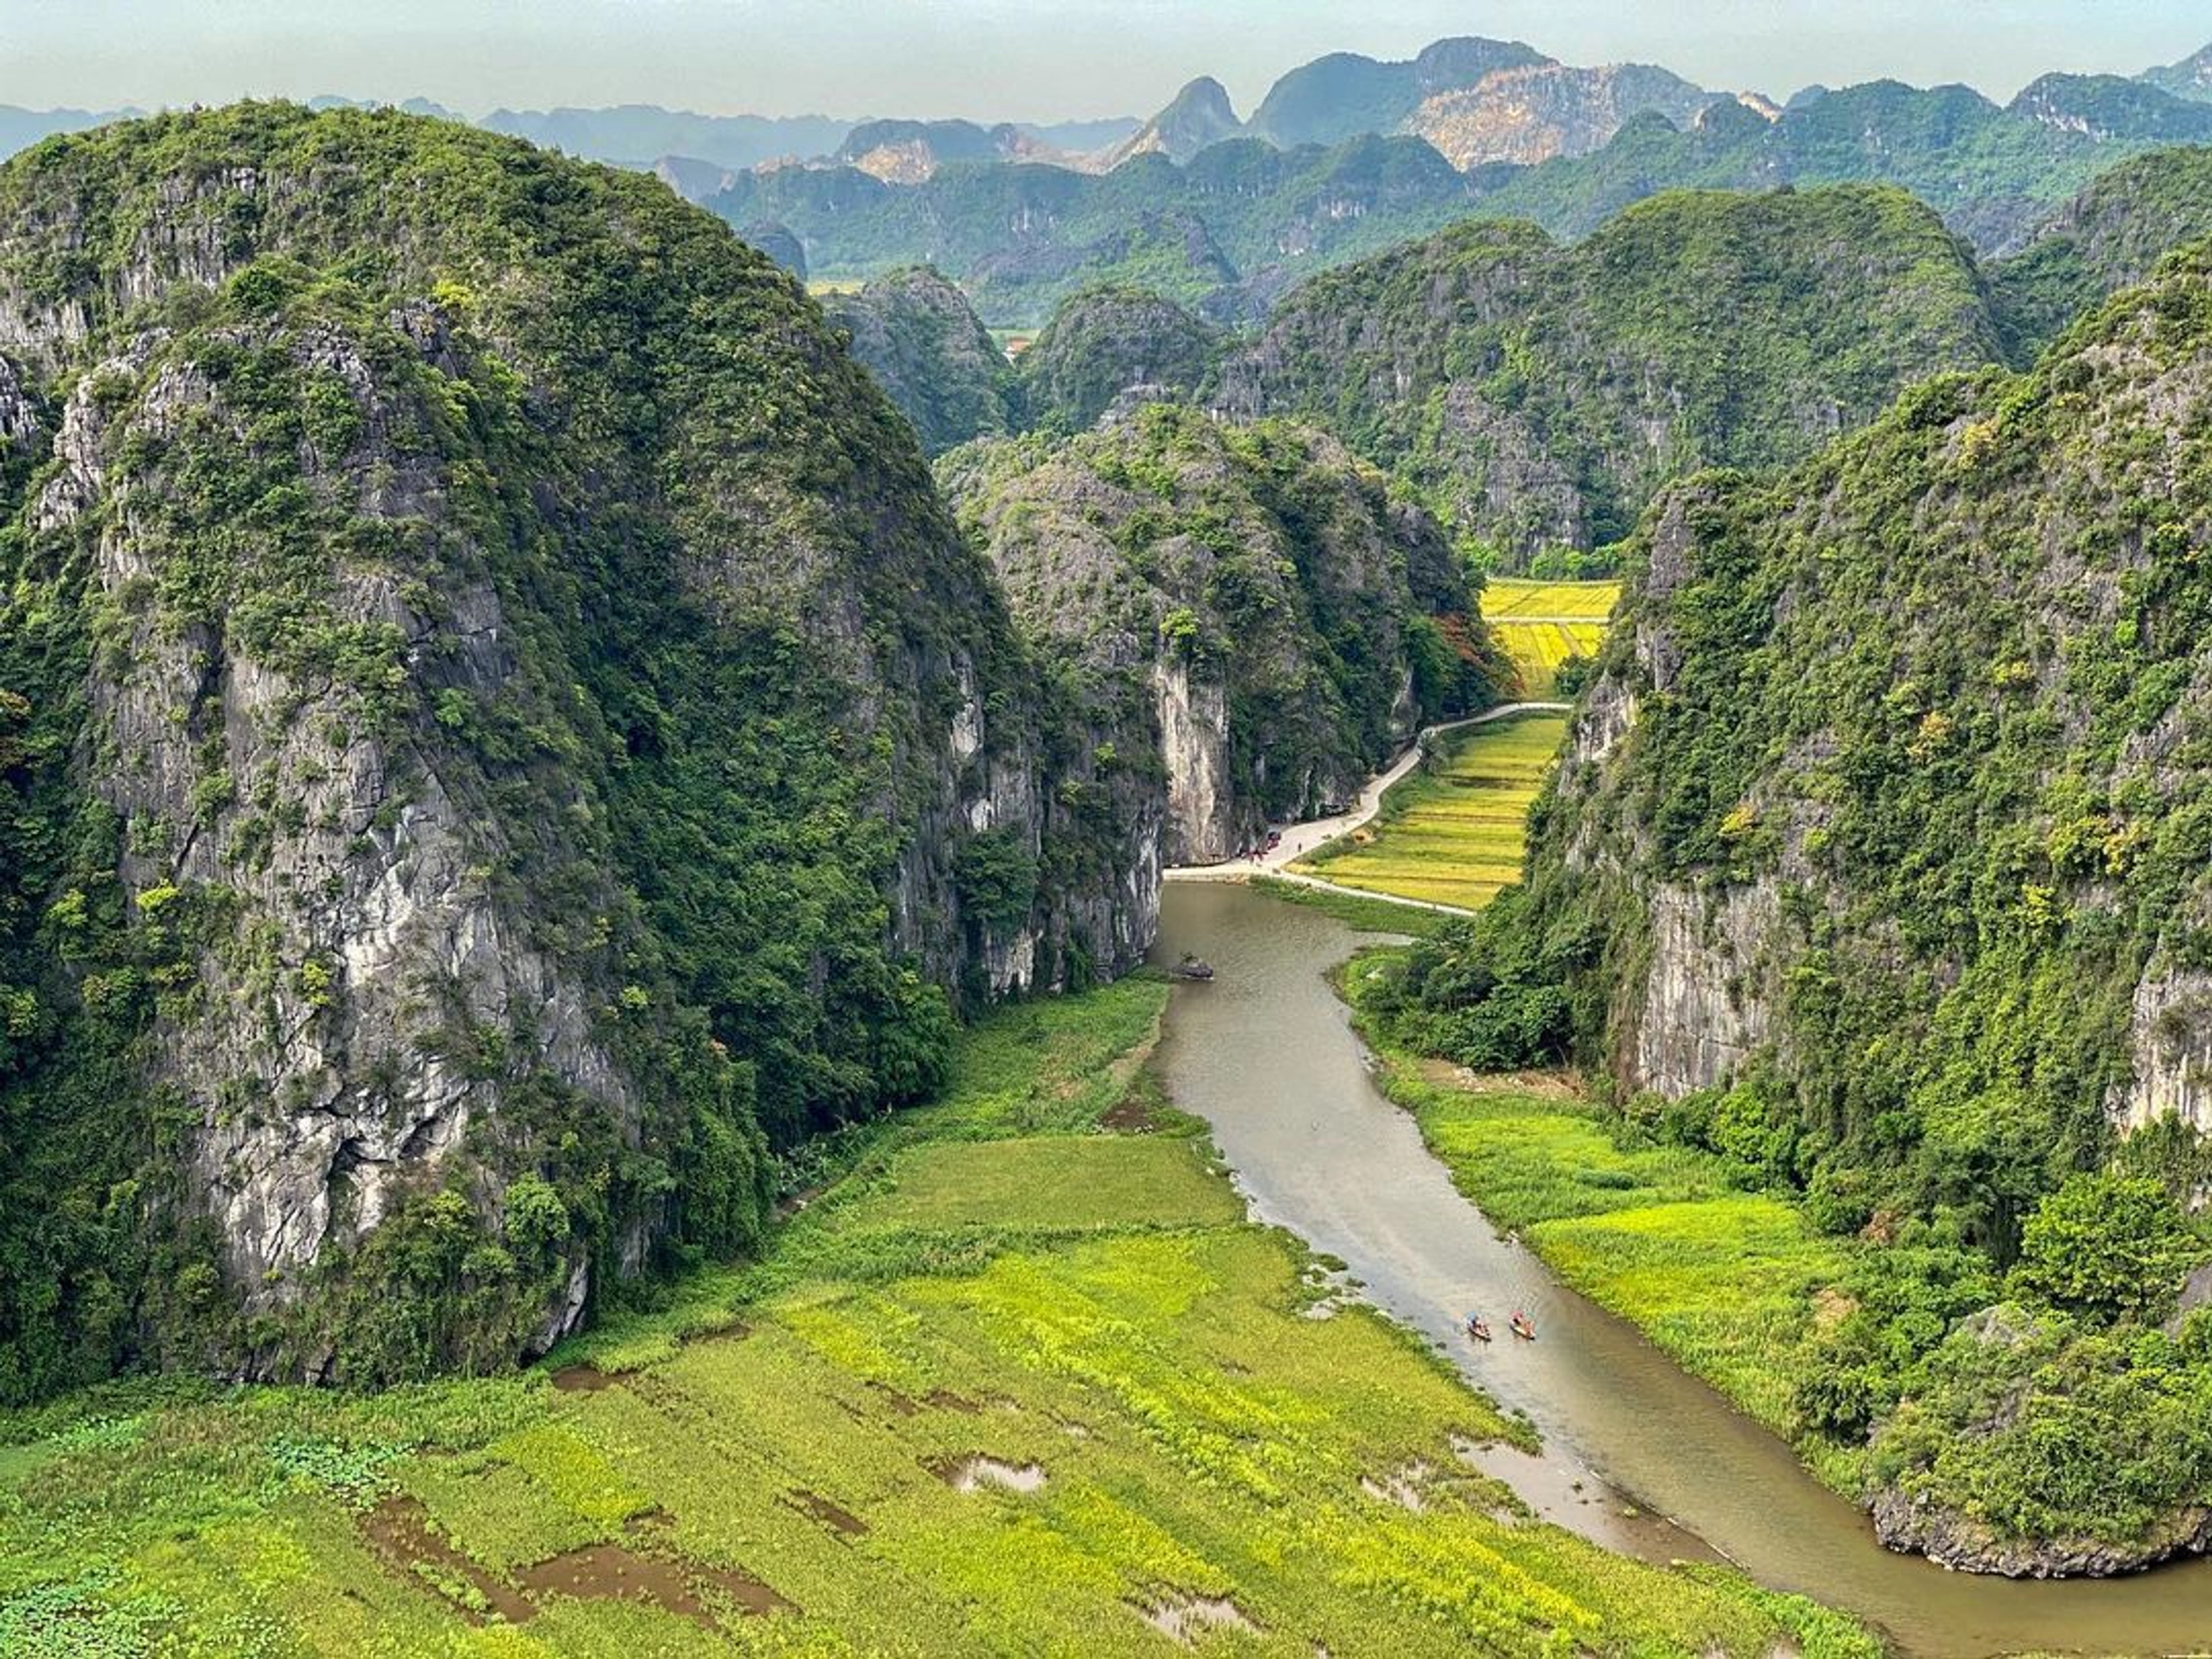 Best time to visit Tam Coc-Bich Dong